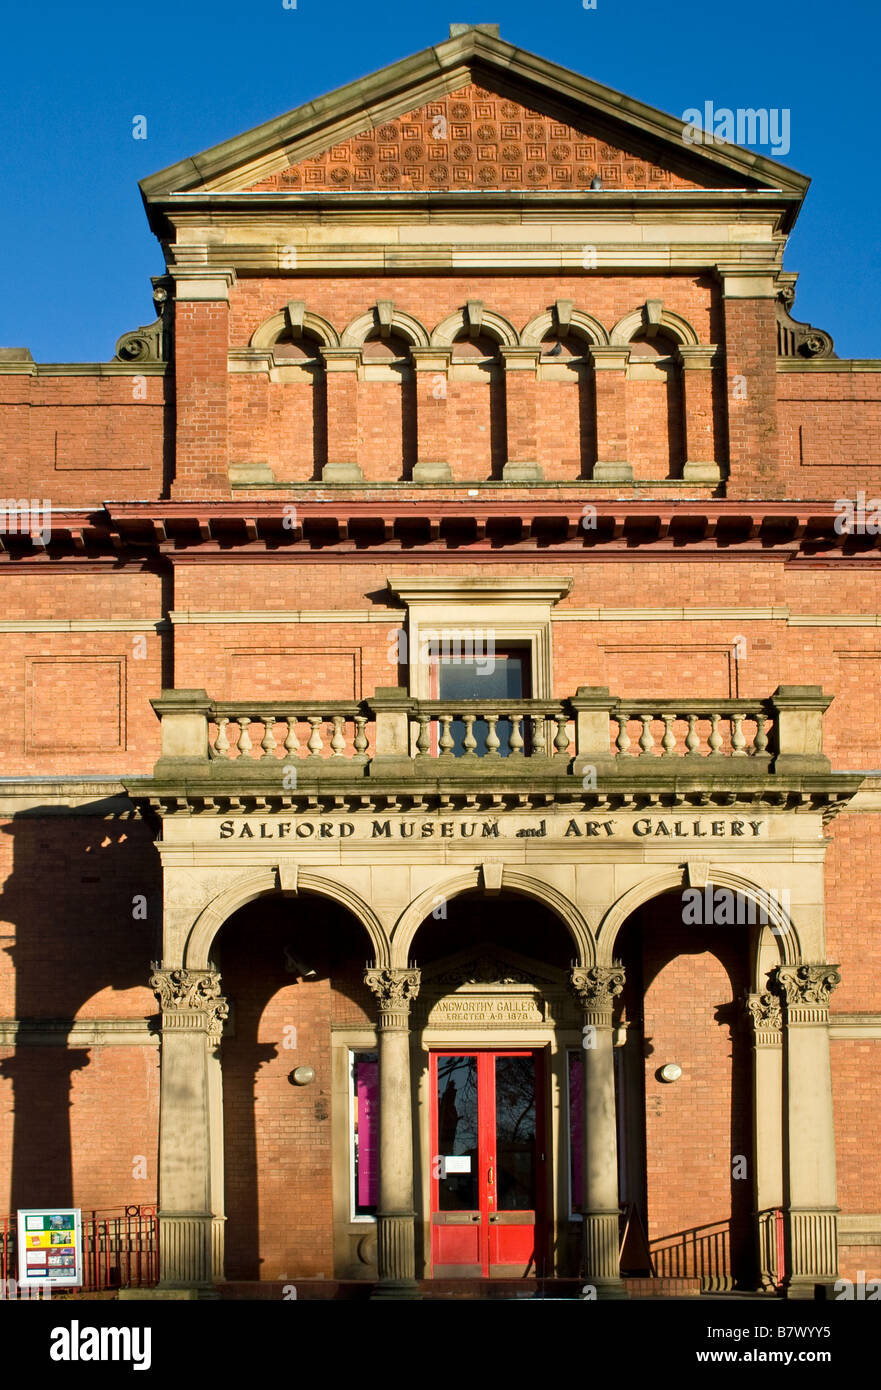 Salford Museum and Art Gallery, Salford, Greater Manchester, UK. Stock Photo